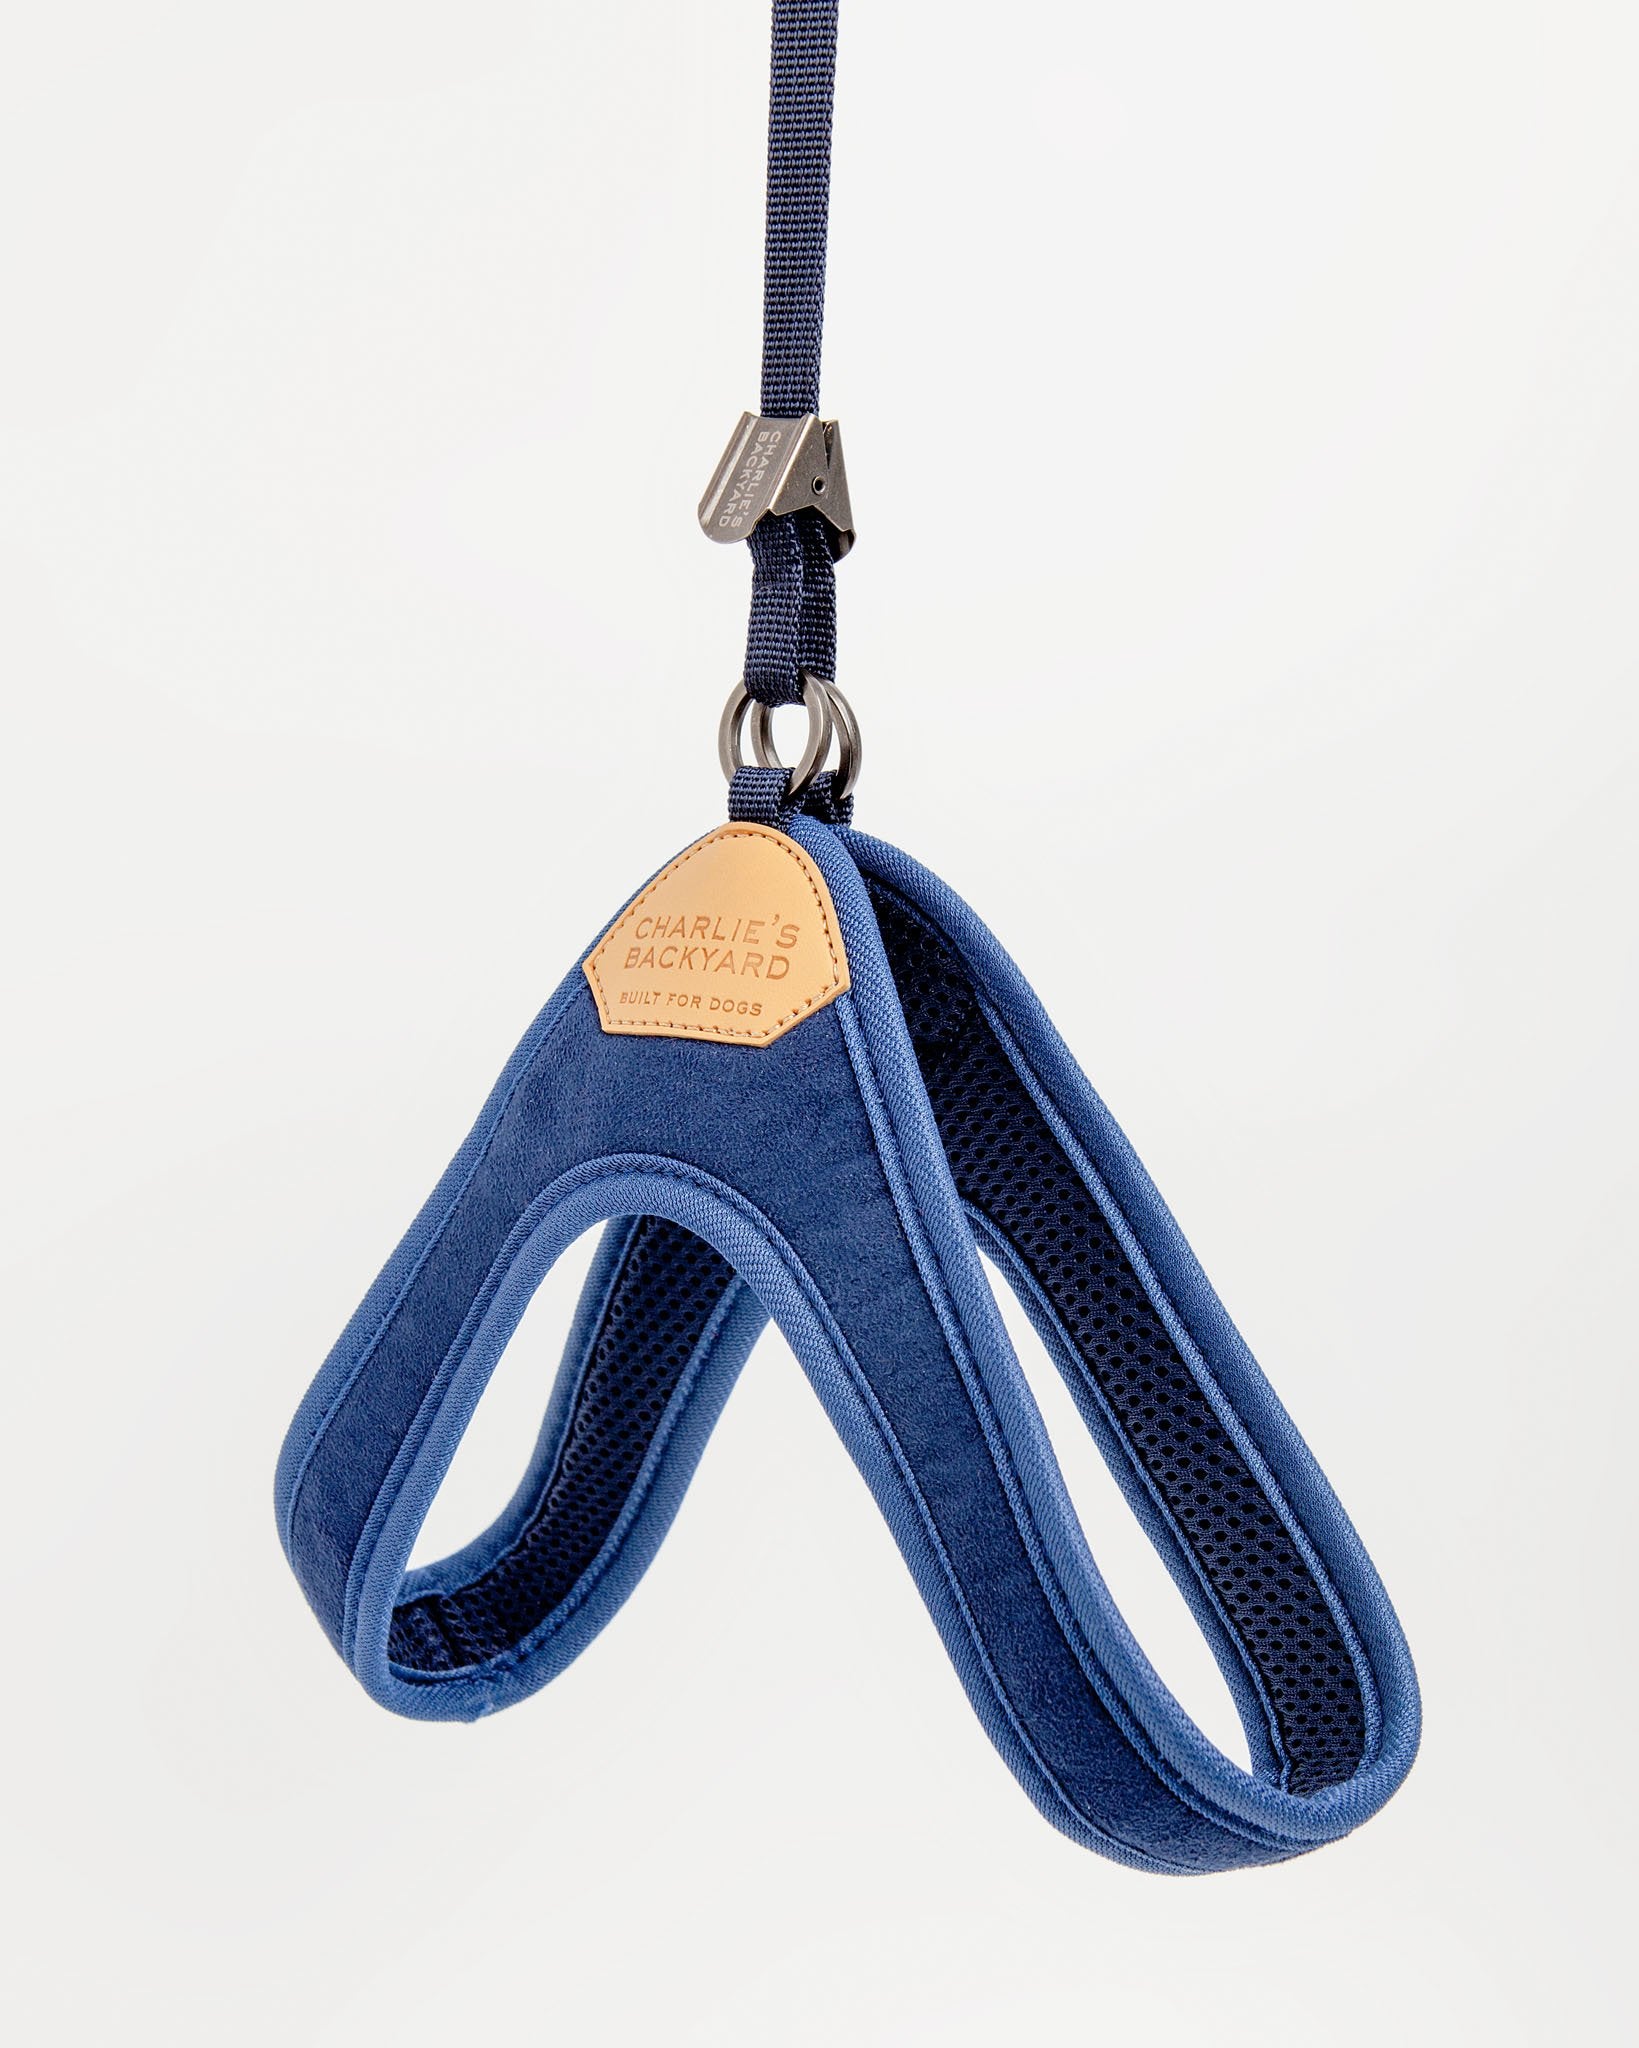 Adjustable Easy Dog Harness in Navy